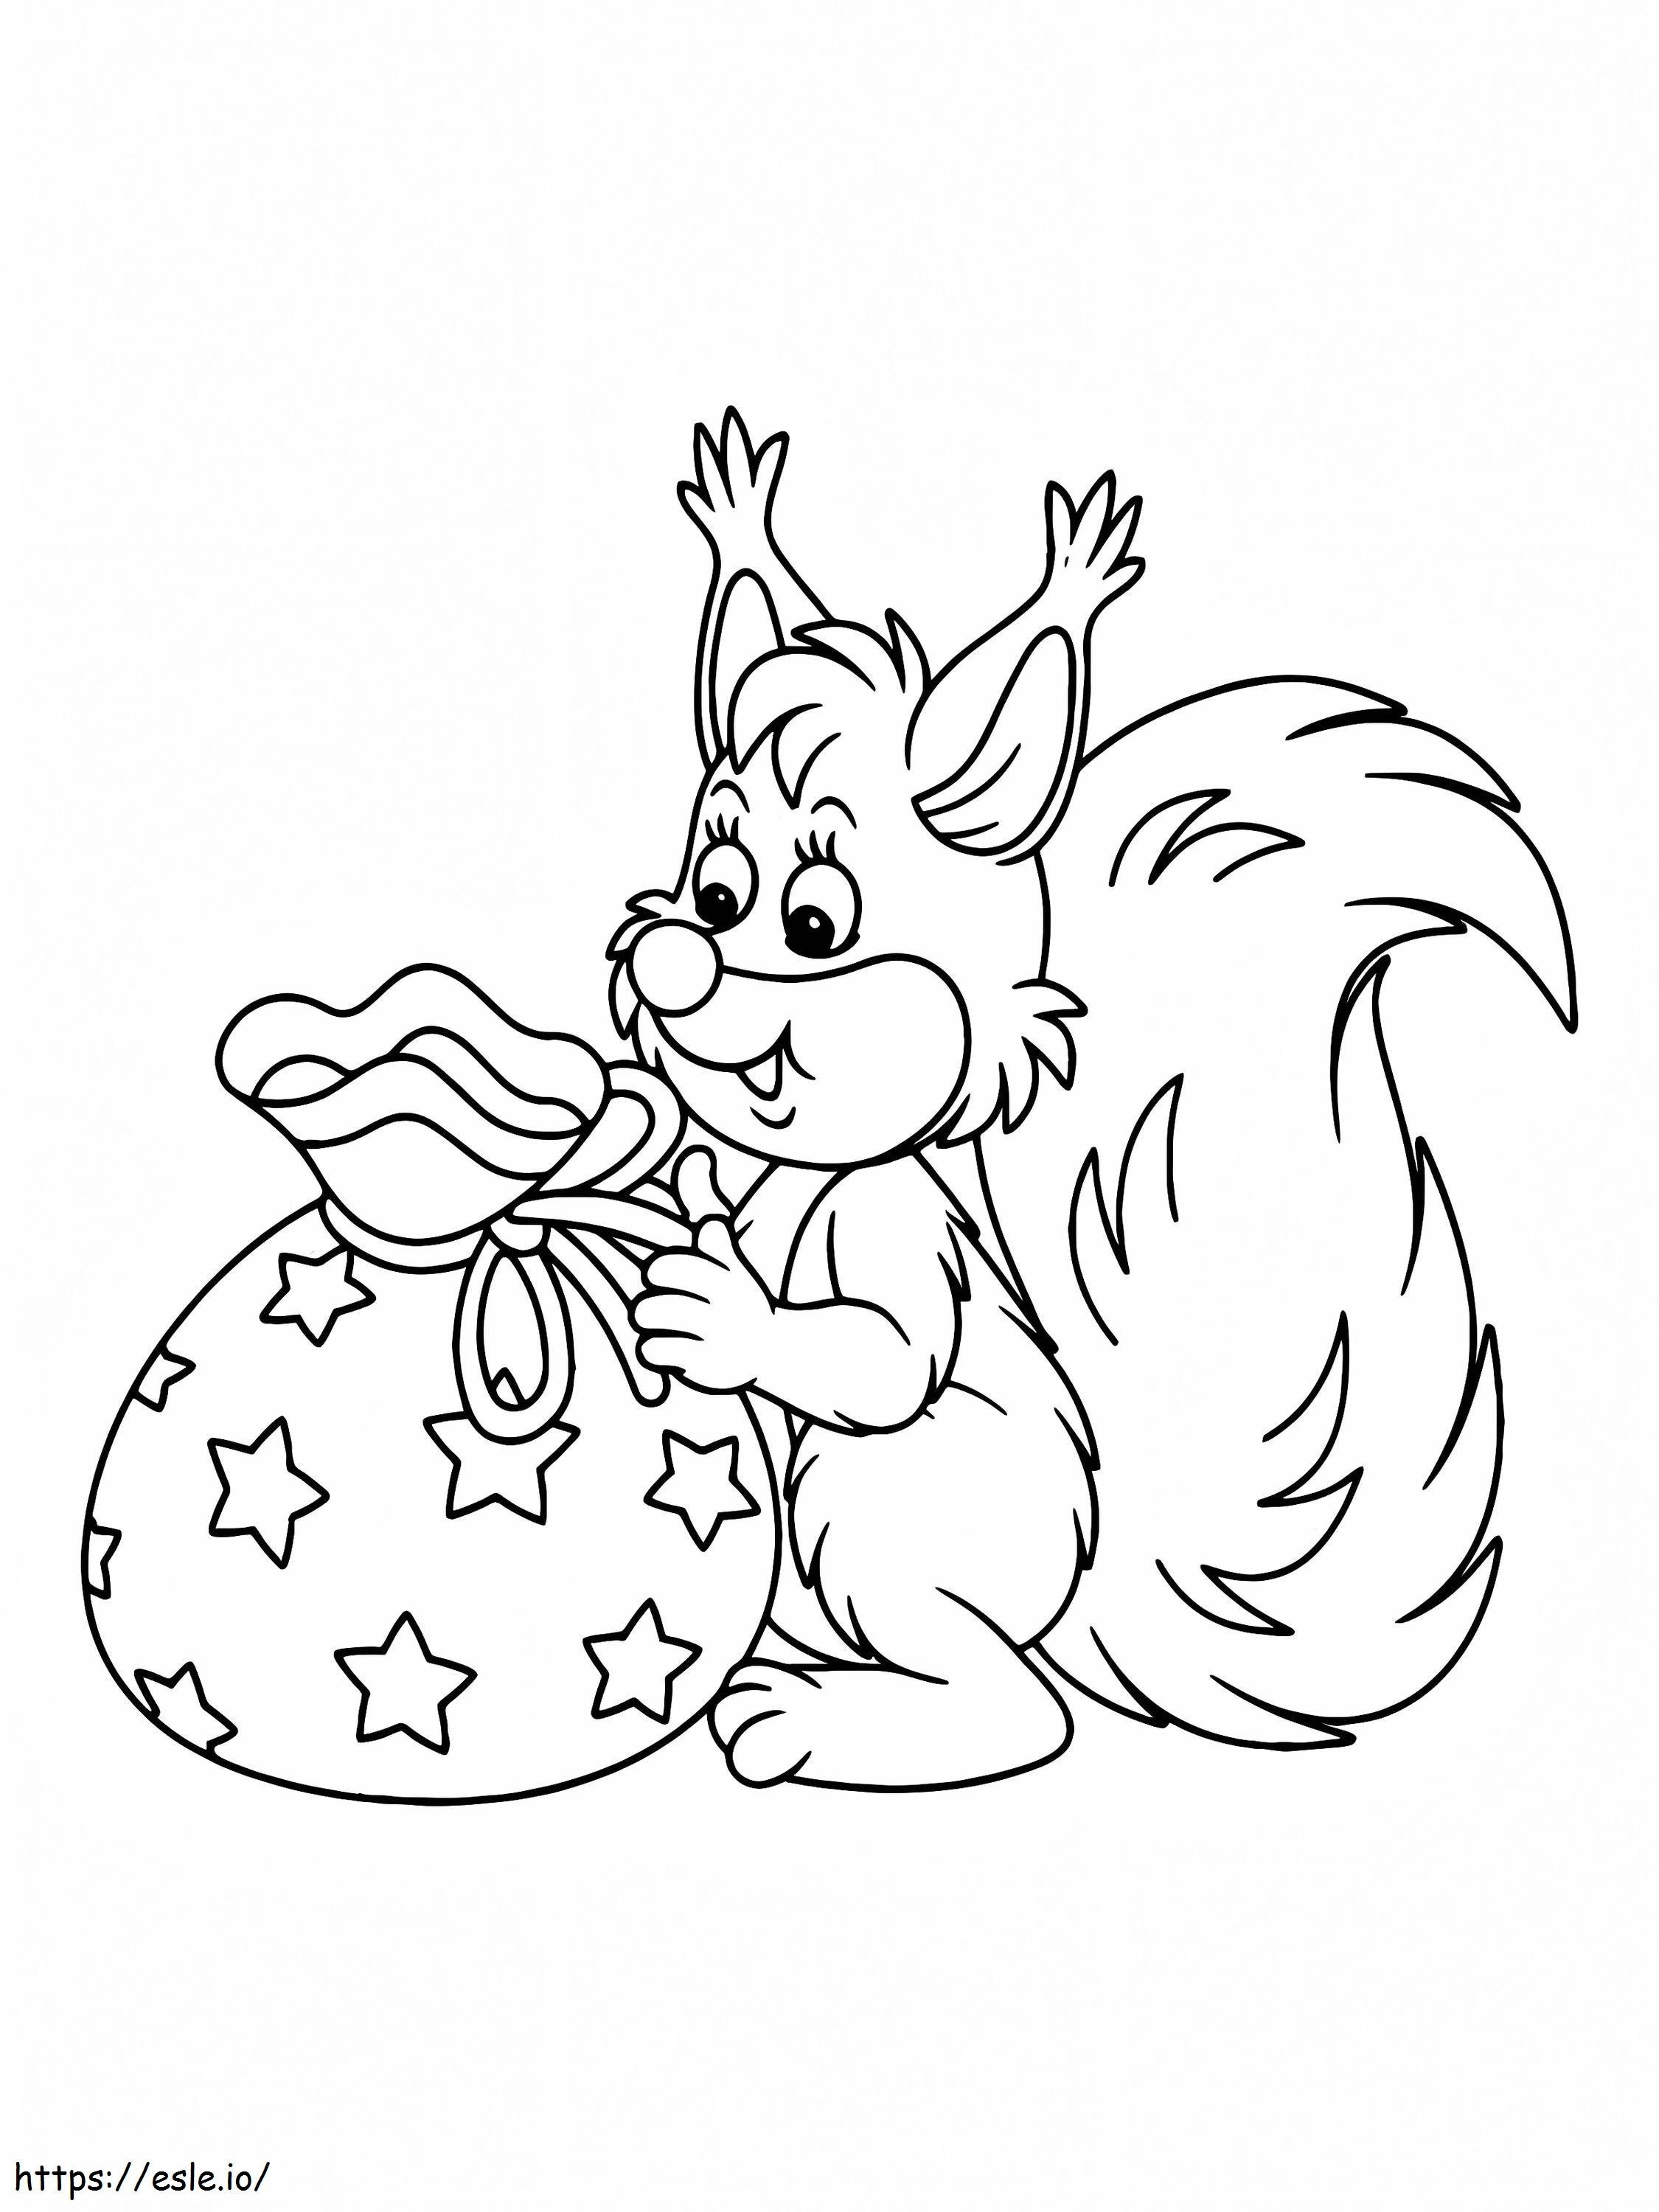 Christmas Squirrel coloring page